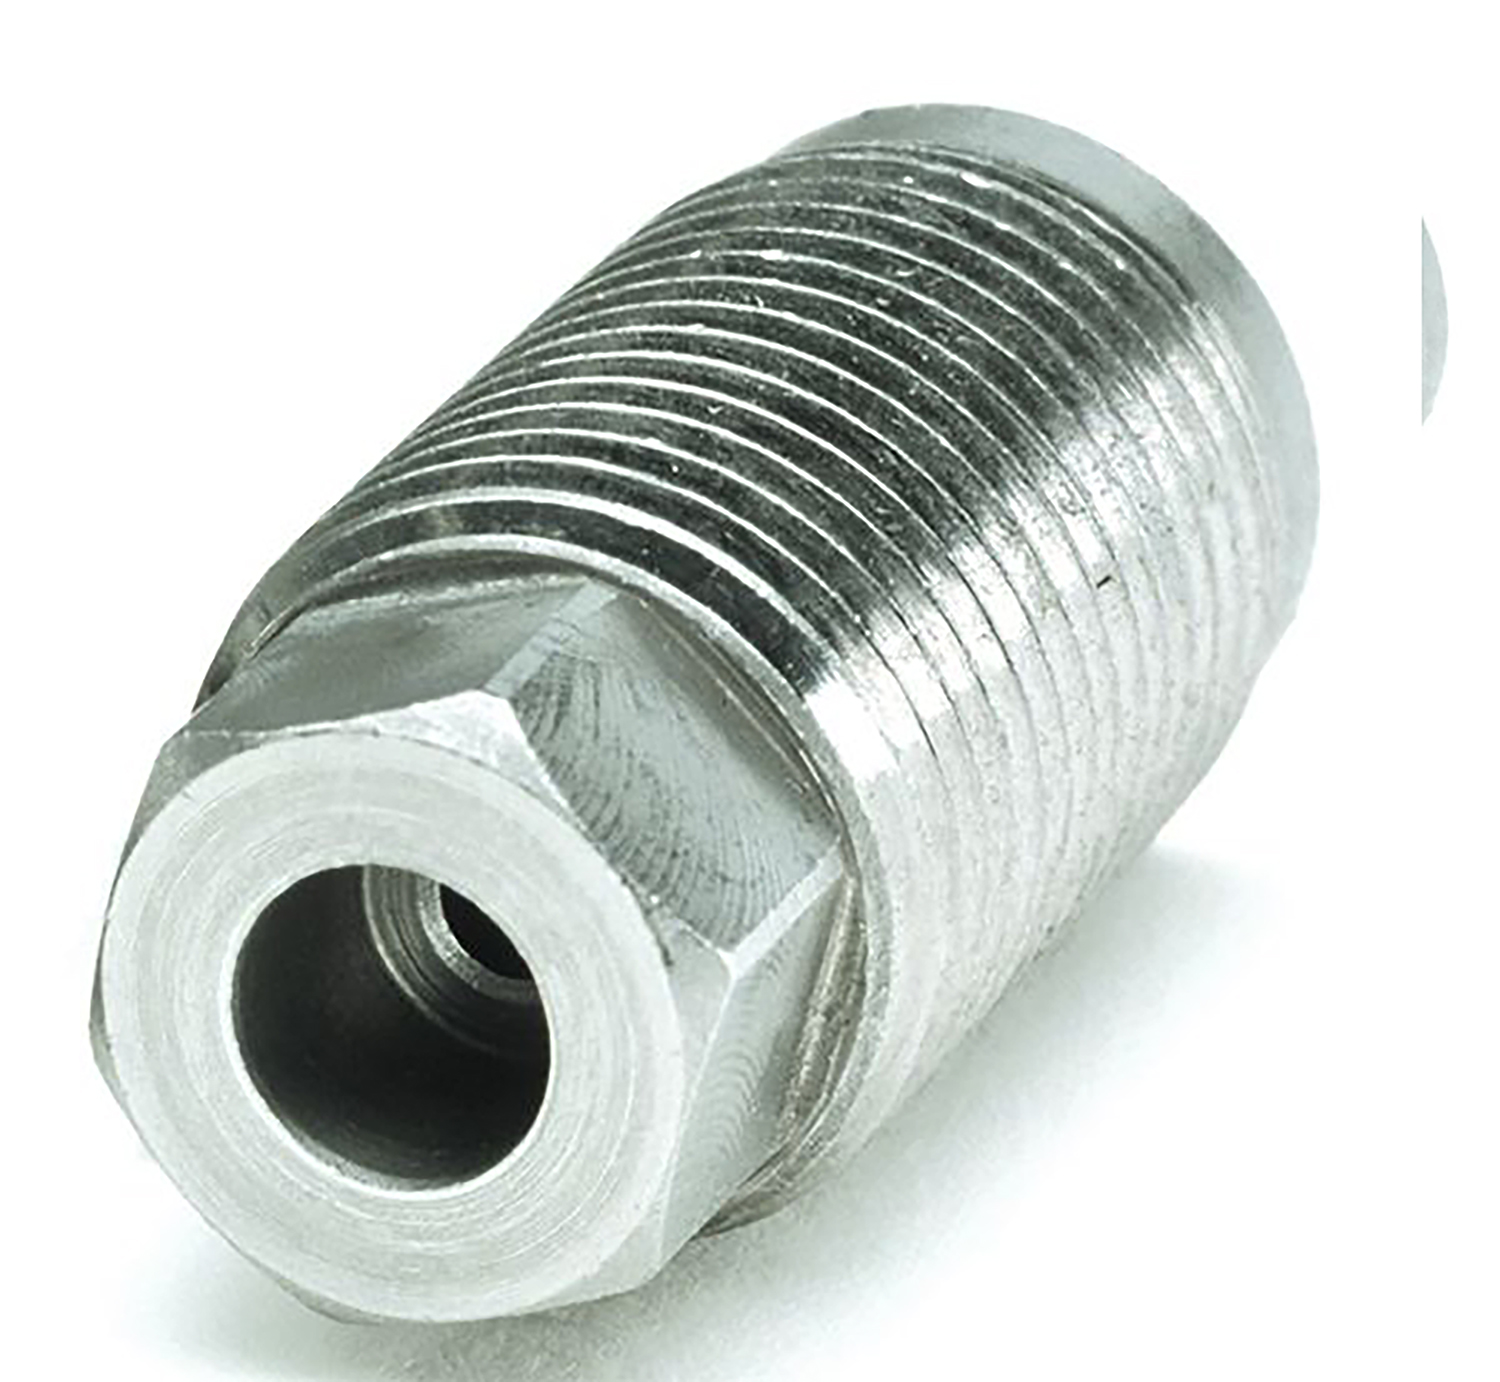 CVA AC1678A Breech Plug Hexhead Replacement made of Stainless Steel